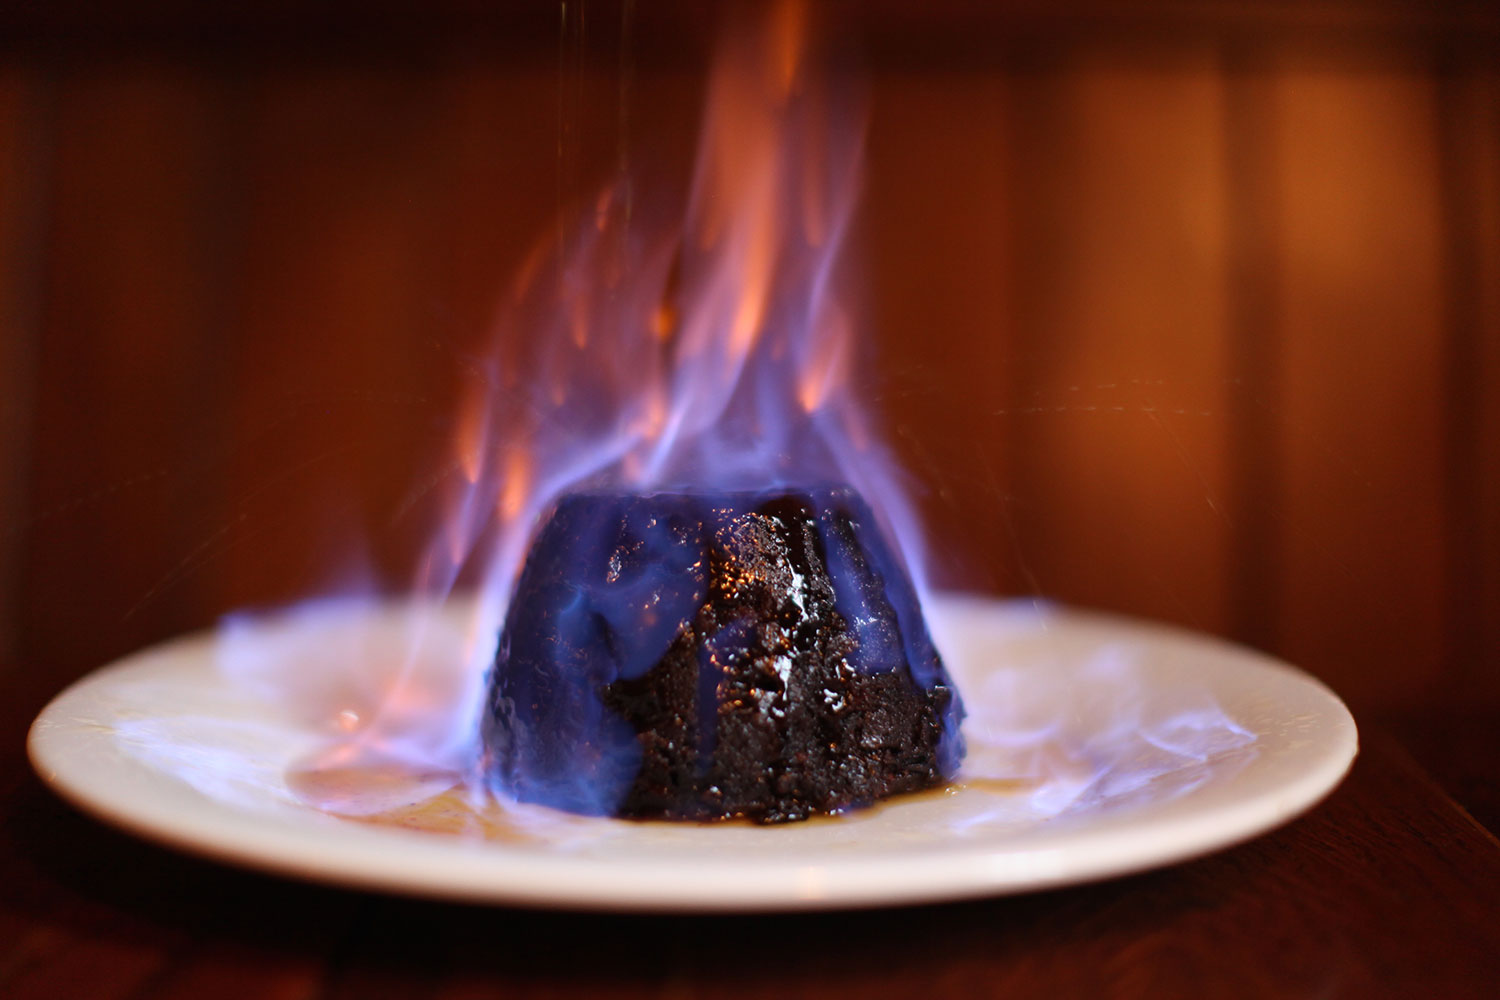 An enthusiastically flambéd Christmas pudding, licked by blue and orange flame